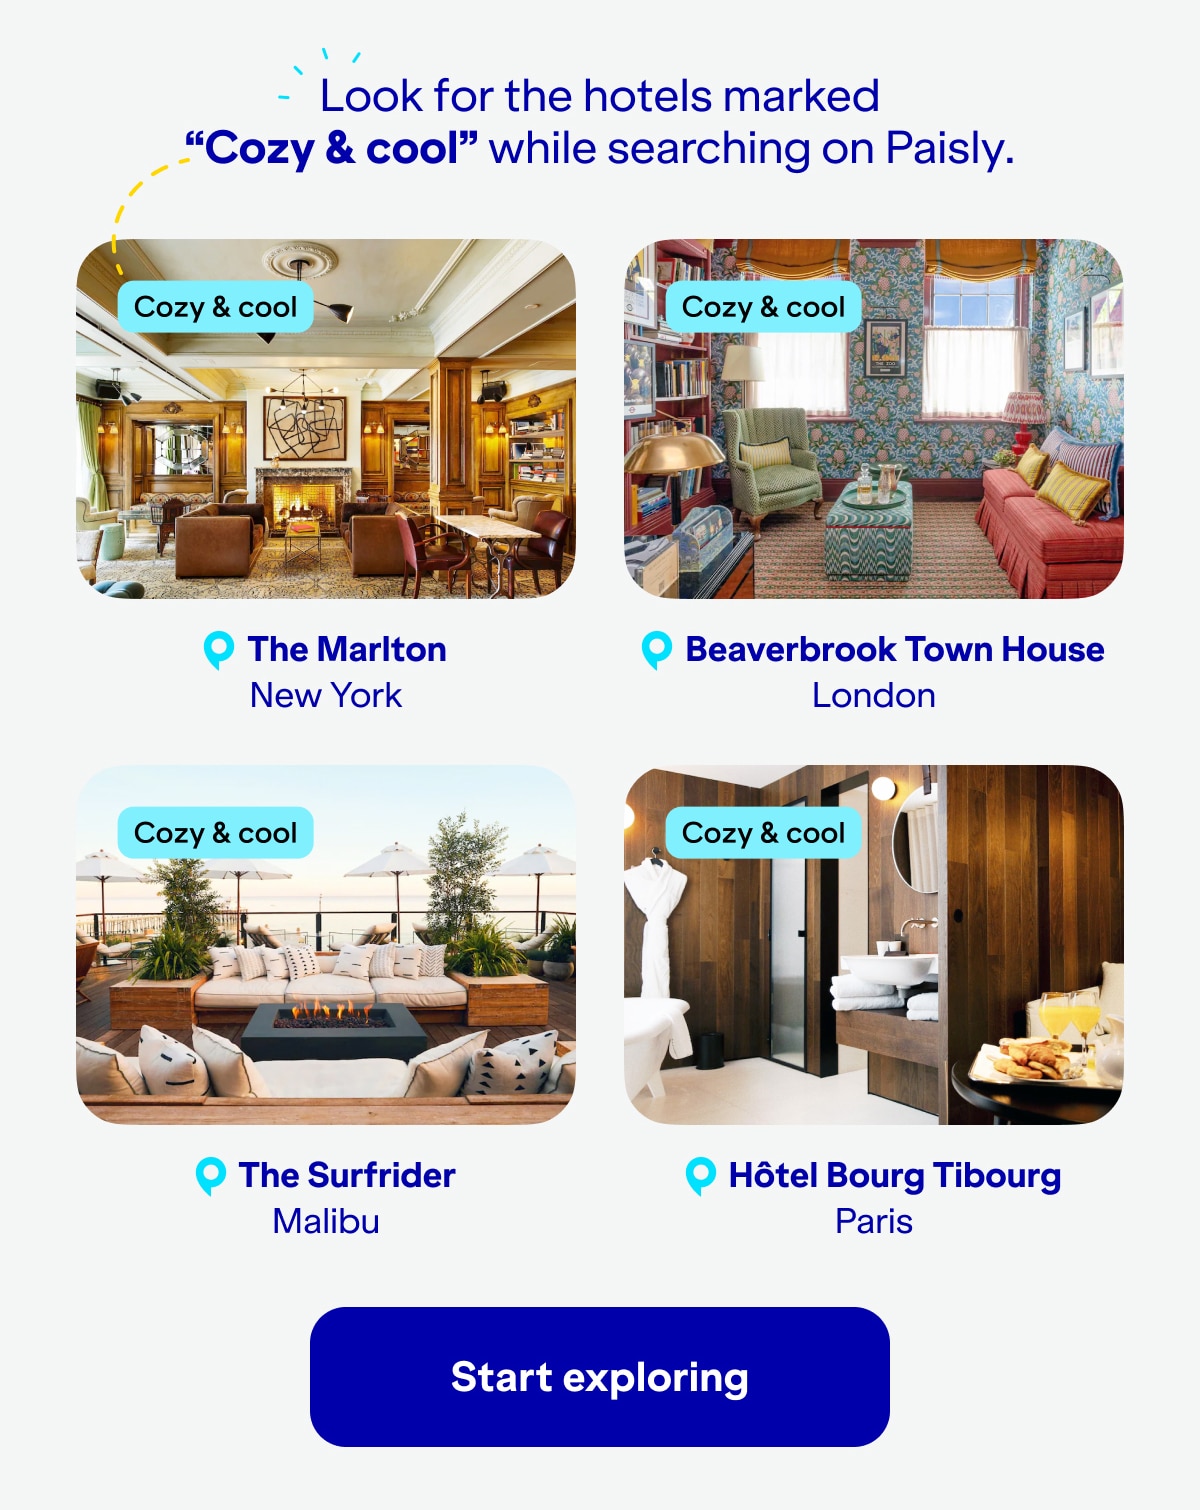 Look for the hotels marked Cozy & cool while searching on Paisly. Hotels include: The Marlton in New York, Beaverbrook Town House in London, The Surfrider in Malibu, and Hotel Bourg Tibourg in Paris. Click here to start exploring.